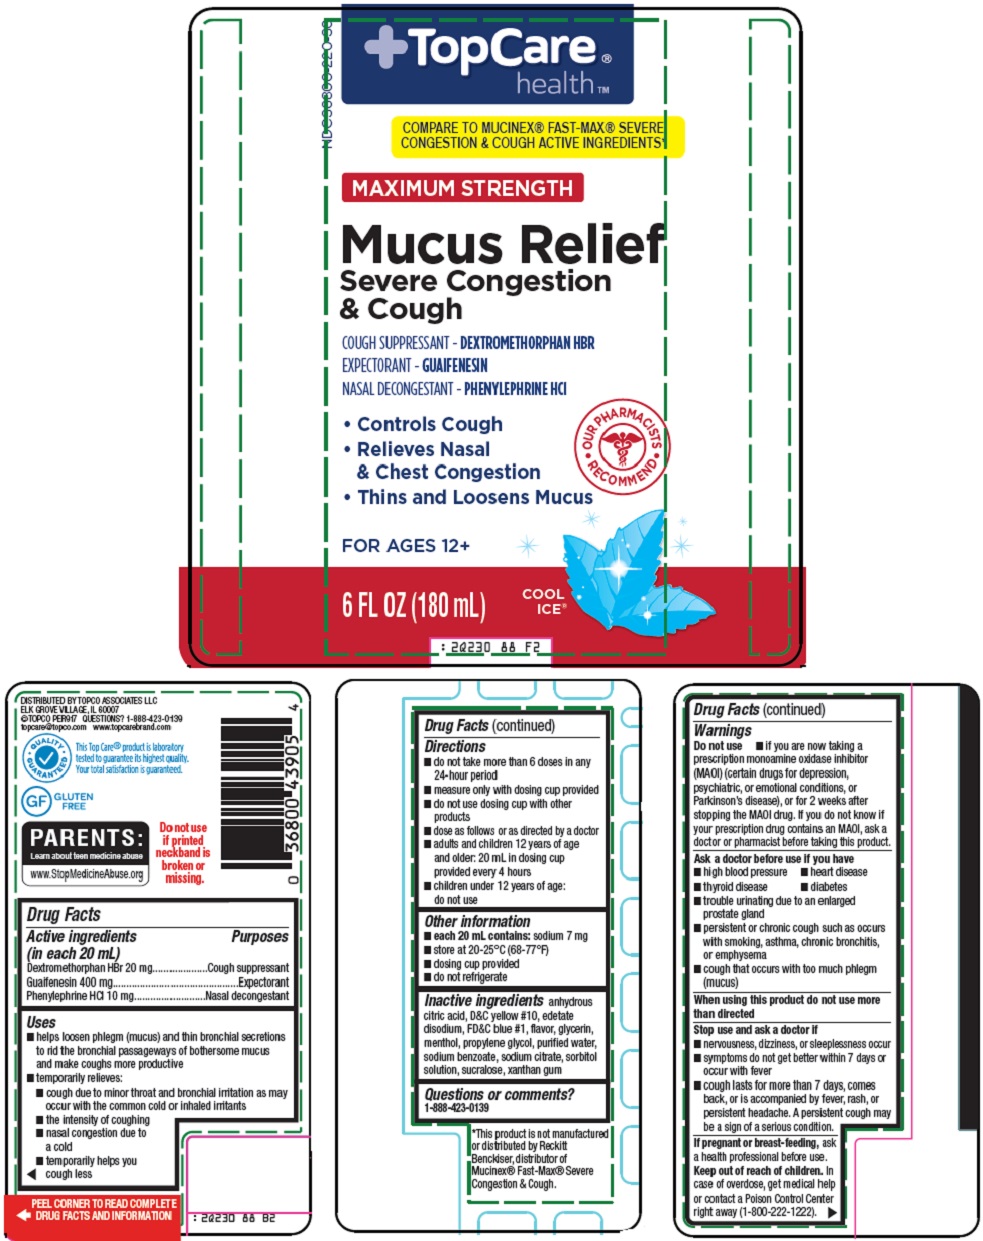 mucus-relief-image